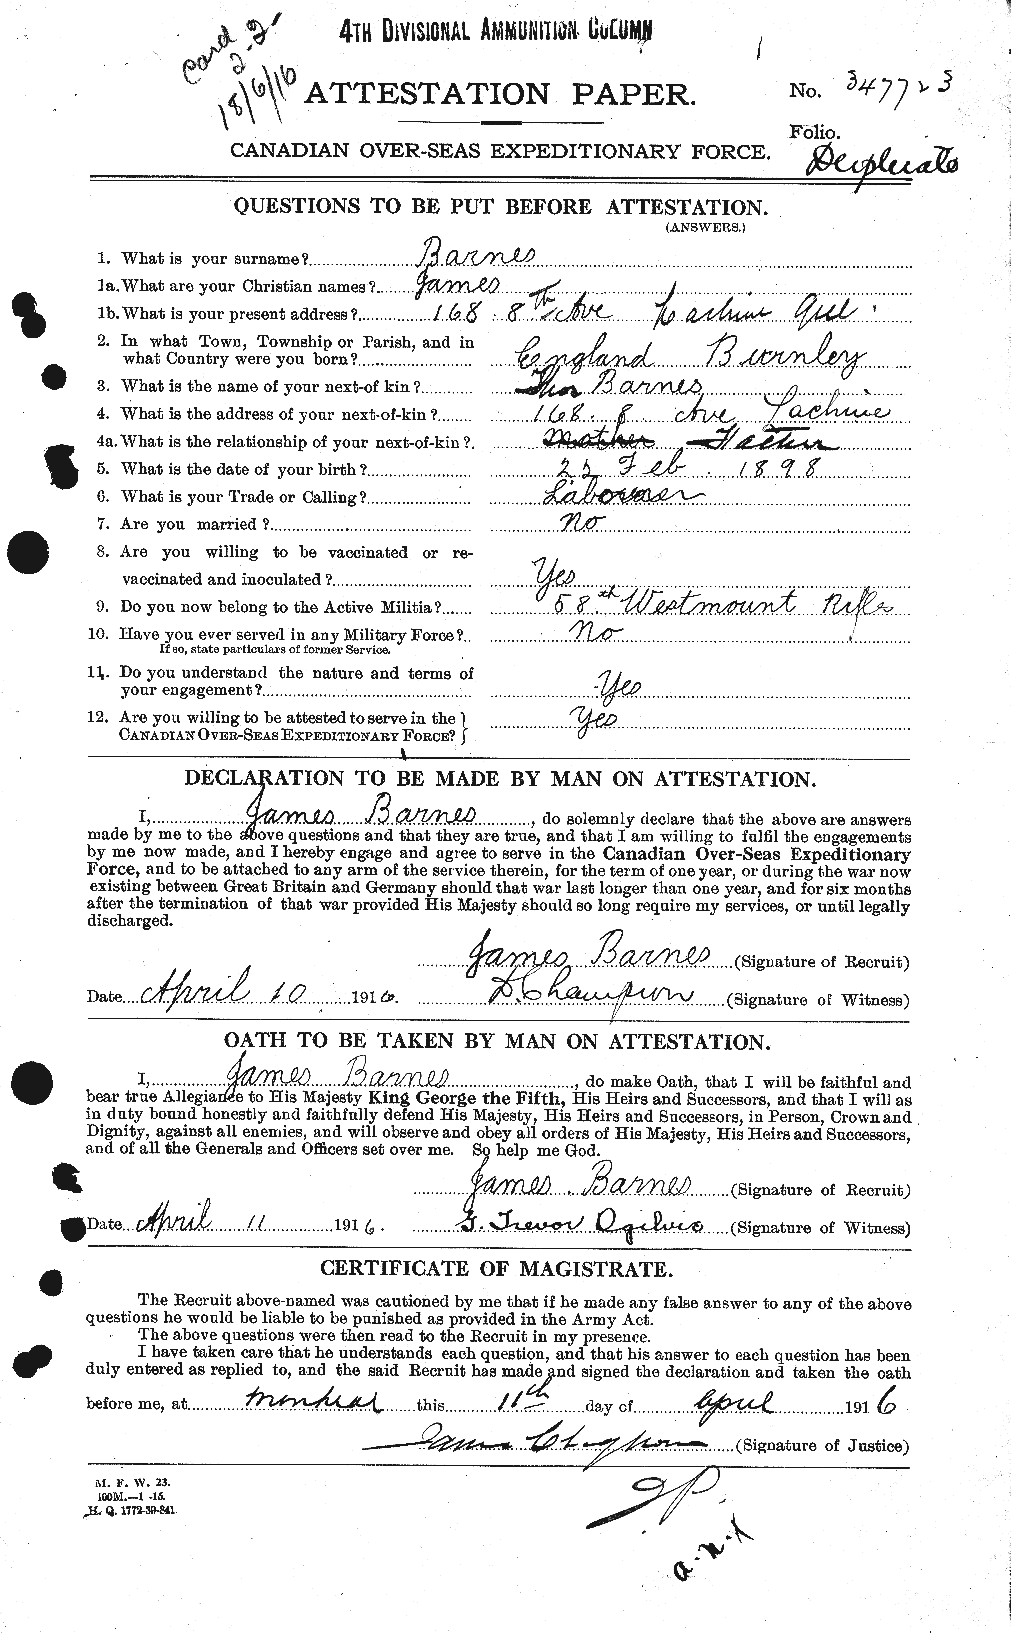 Personnel Records of the First World War - CEF 227470a